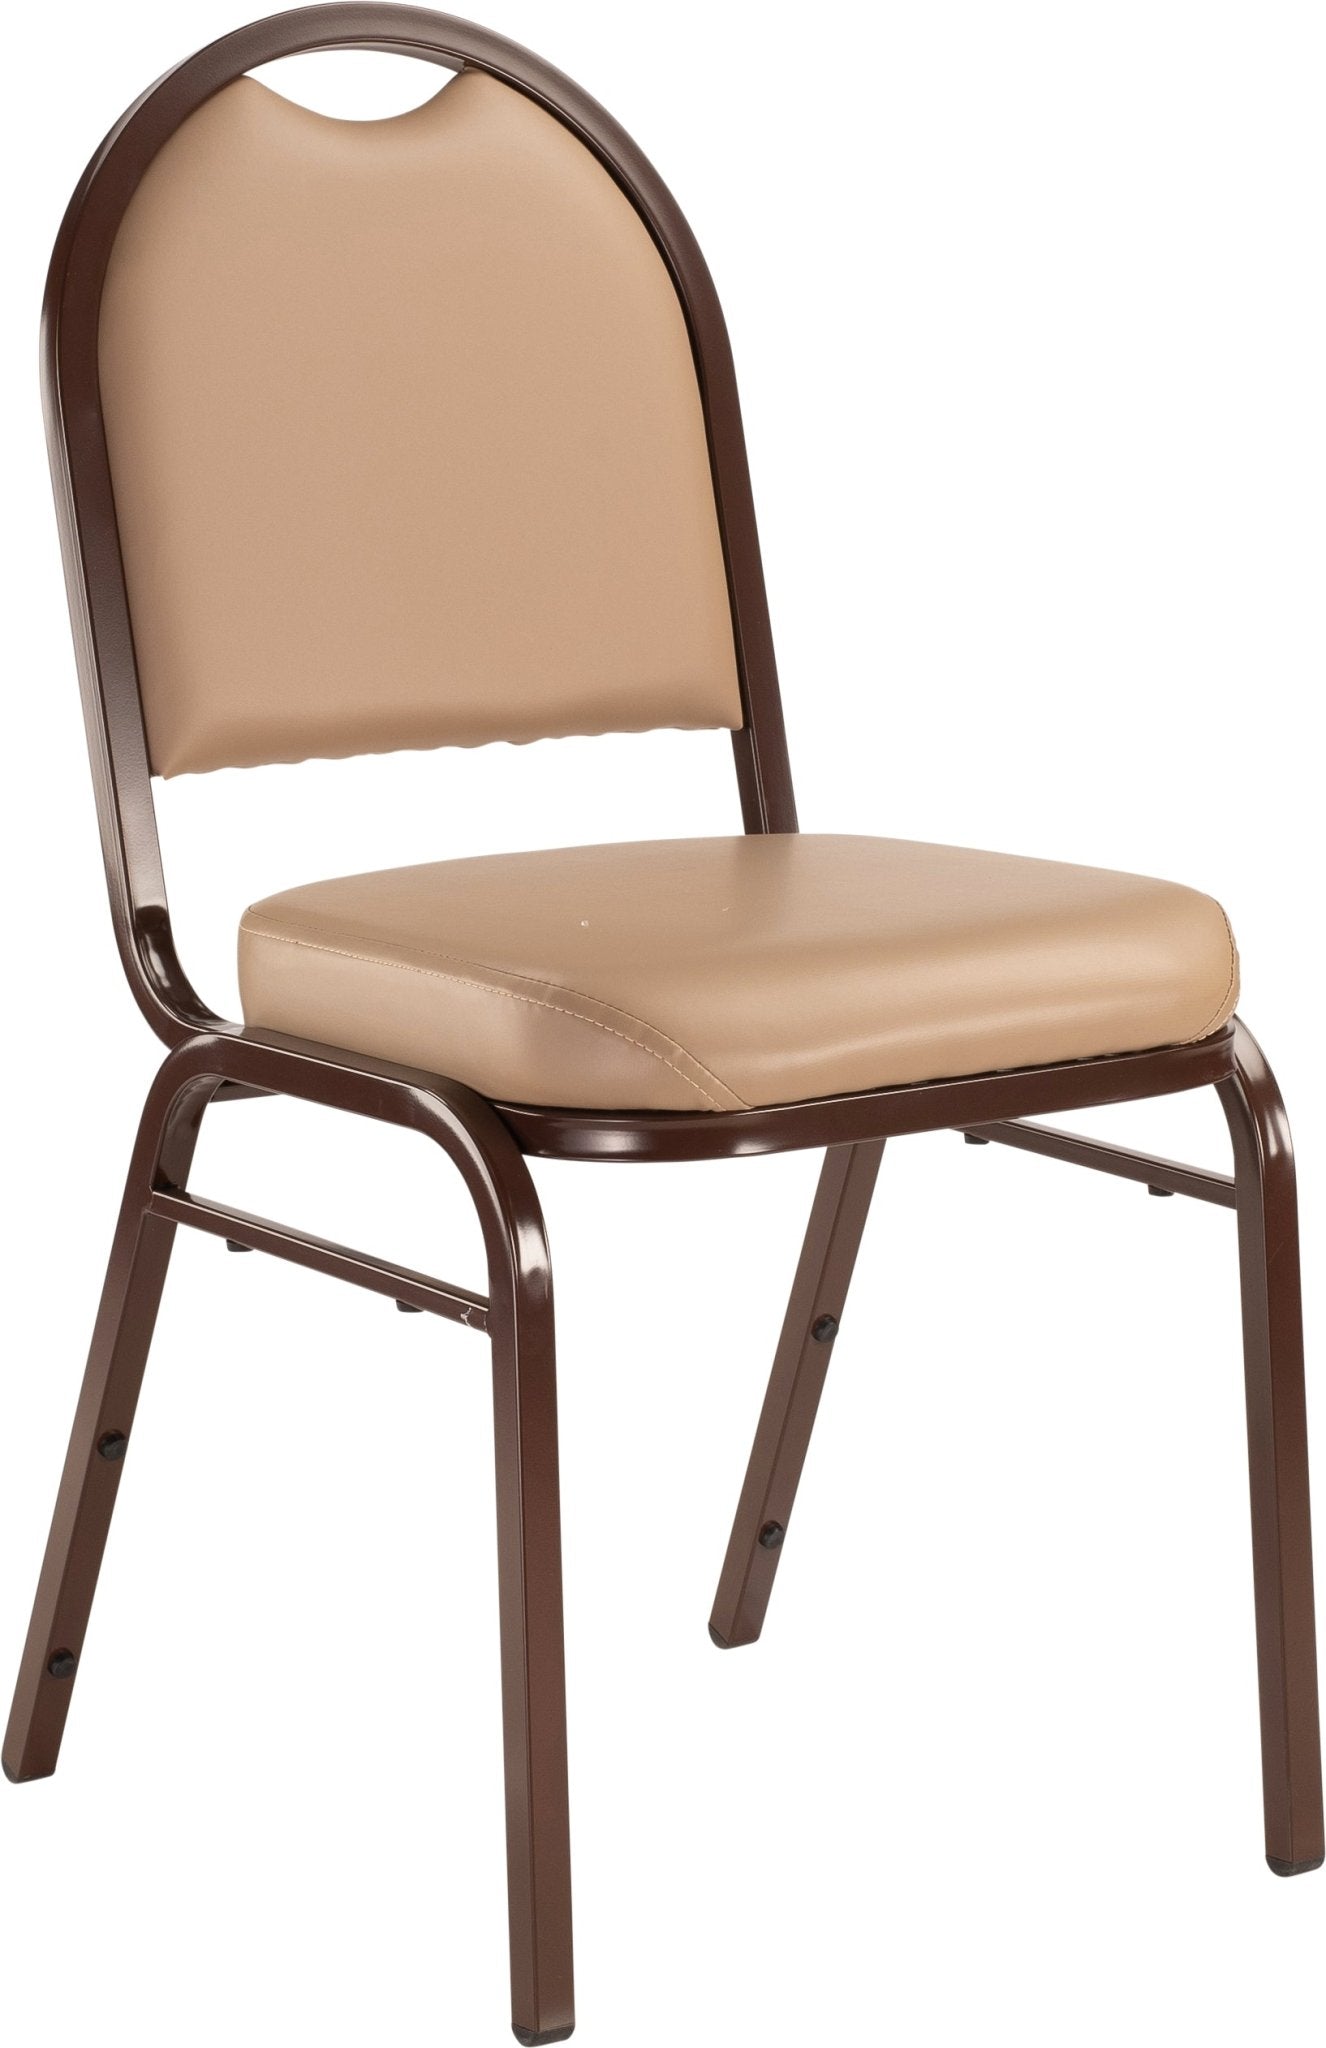 NPS 9200 Series Dome Premium Upholstered Padded Stack Chair (National Public Seating NPS-9200) - SchoolOutlet